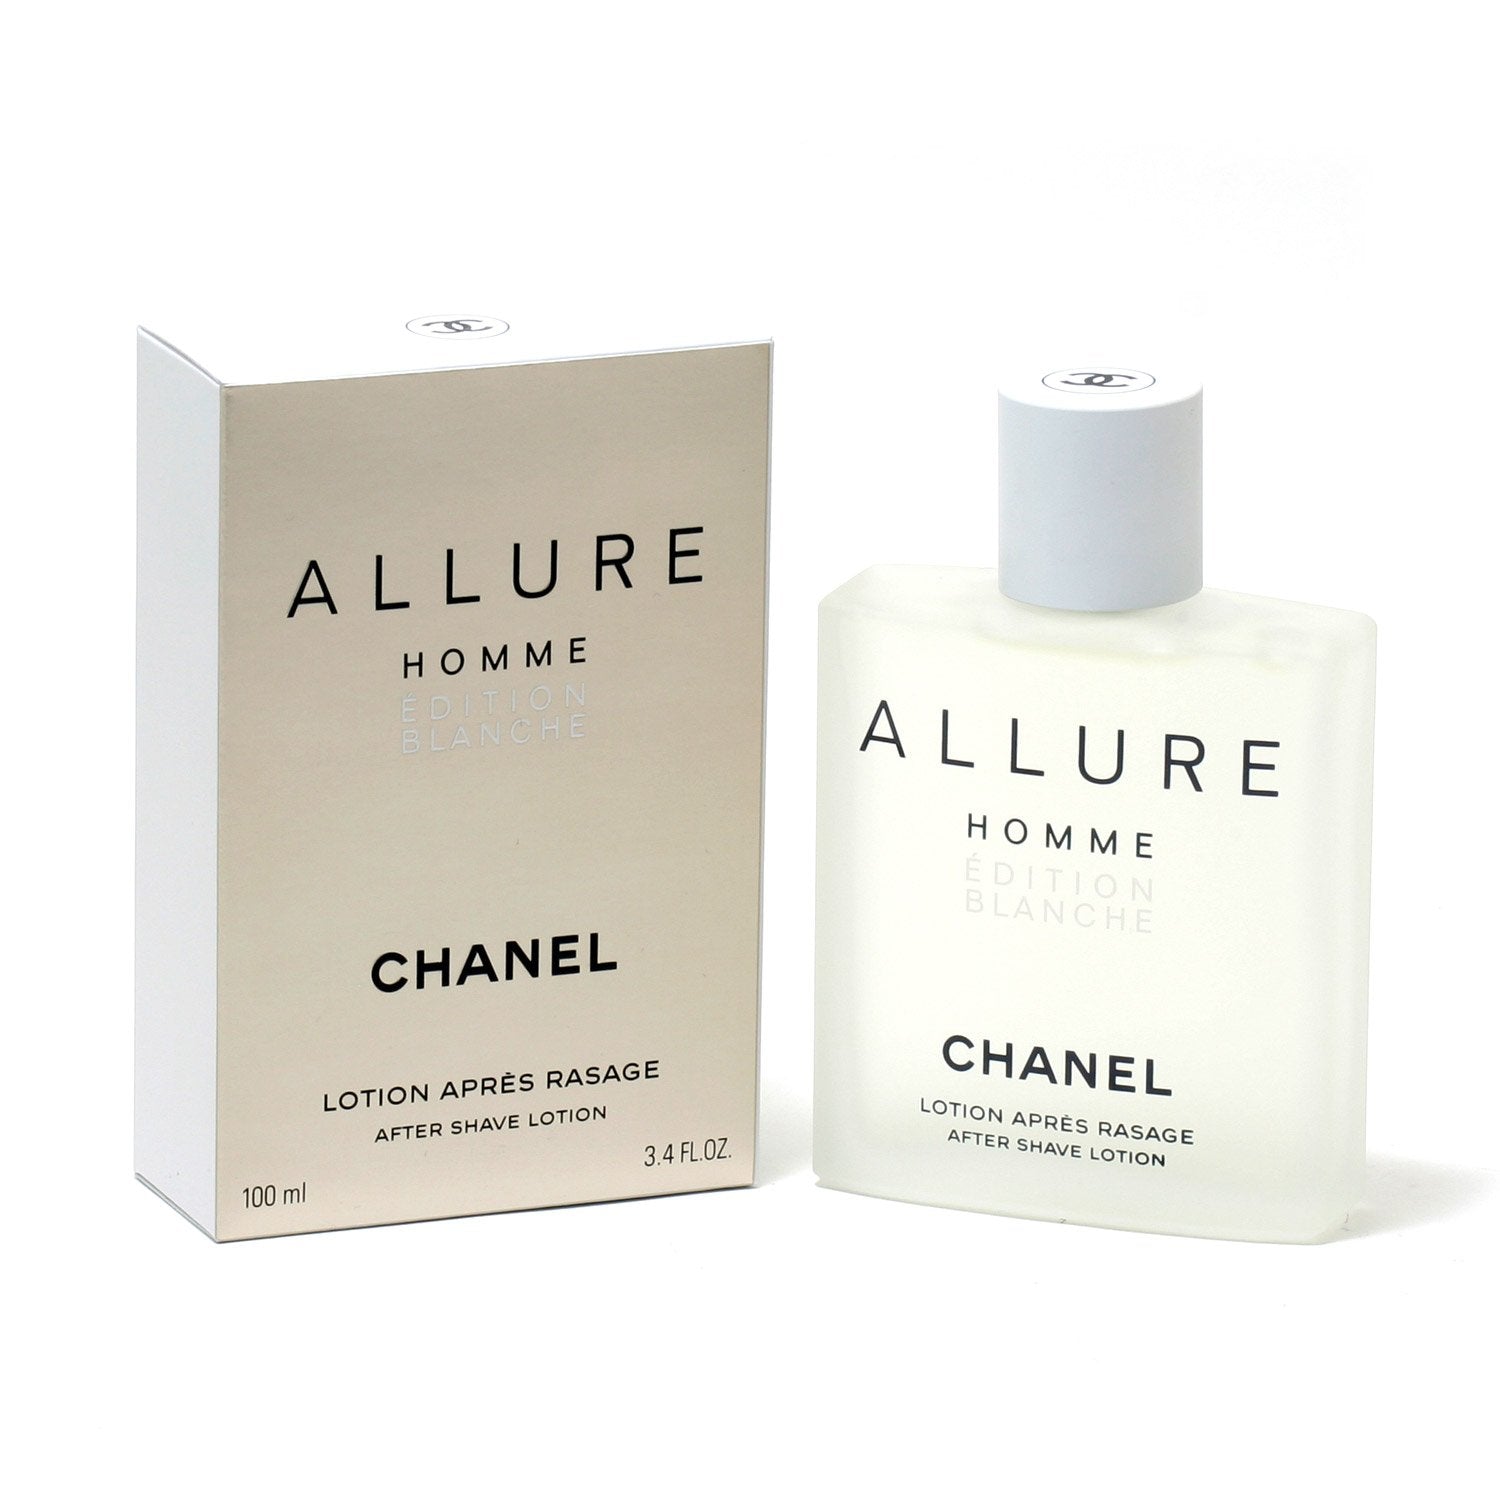 Cologne - CHANEL ALLURE MEN BLANCHE EDITION - AFTER SHAVE LOTION, 3.4 OZ